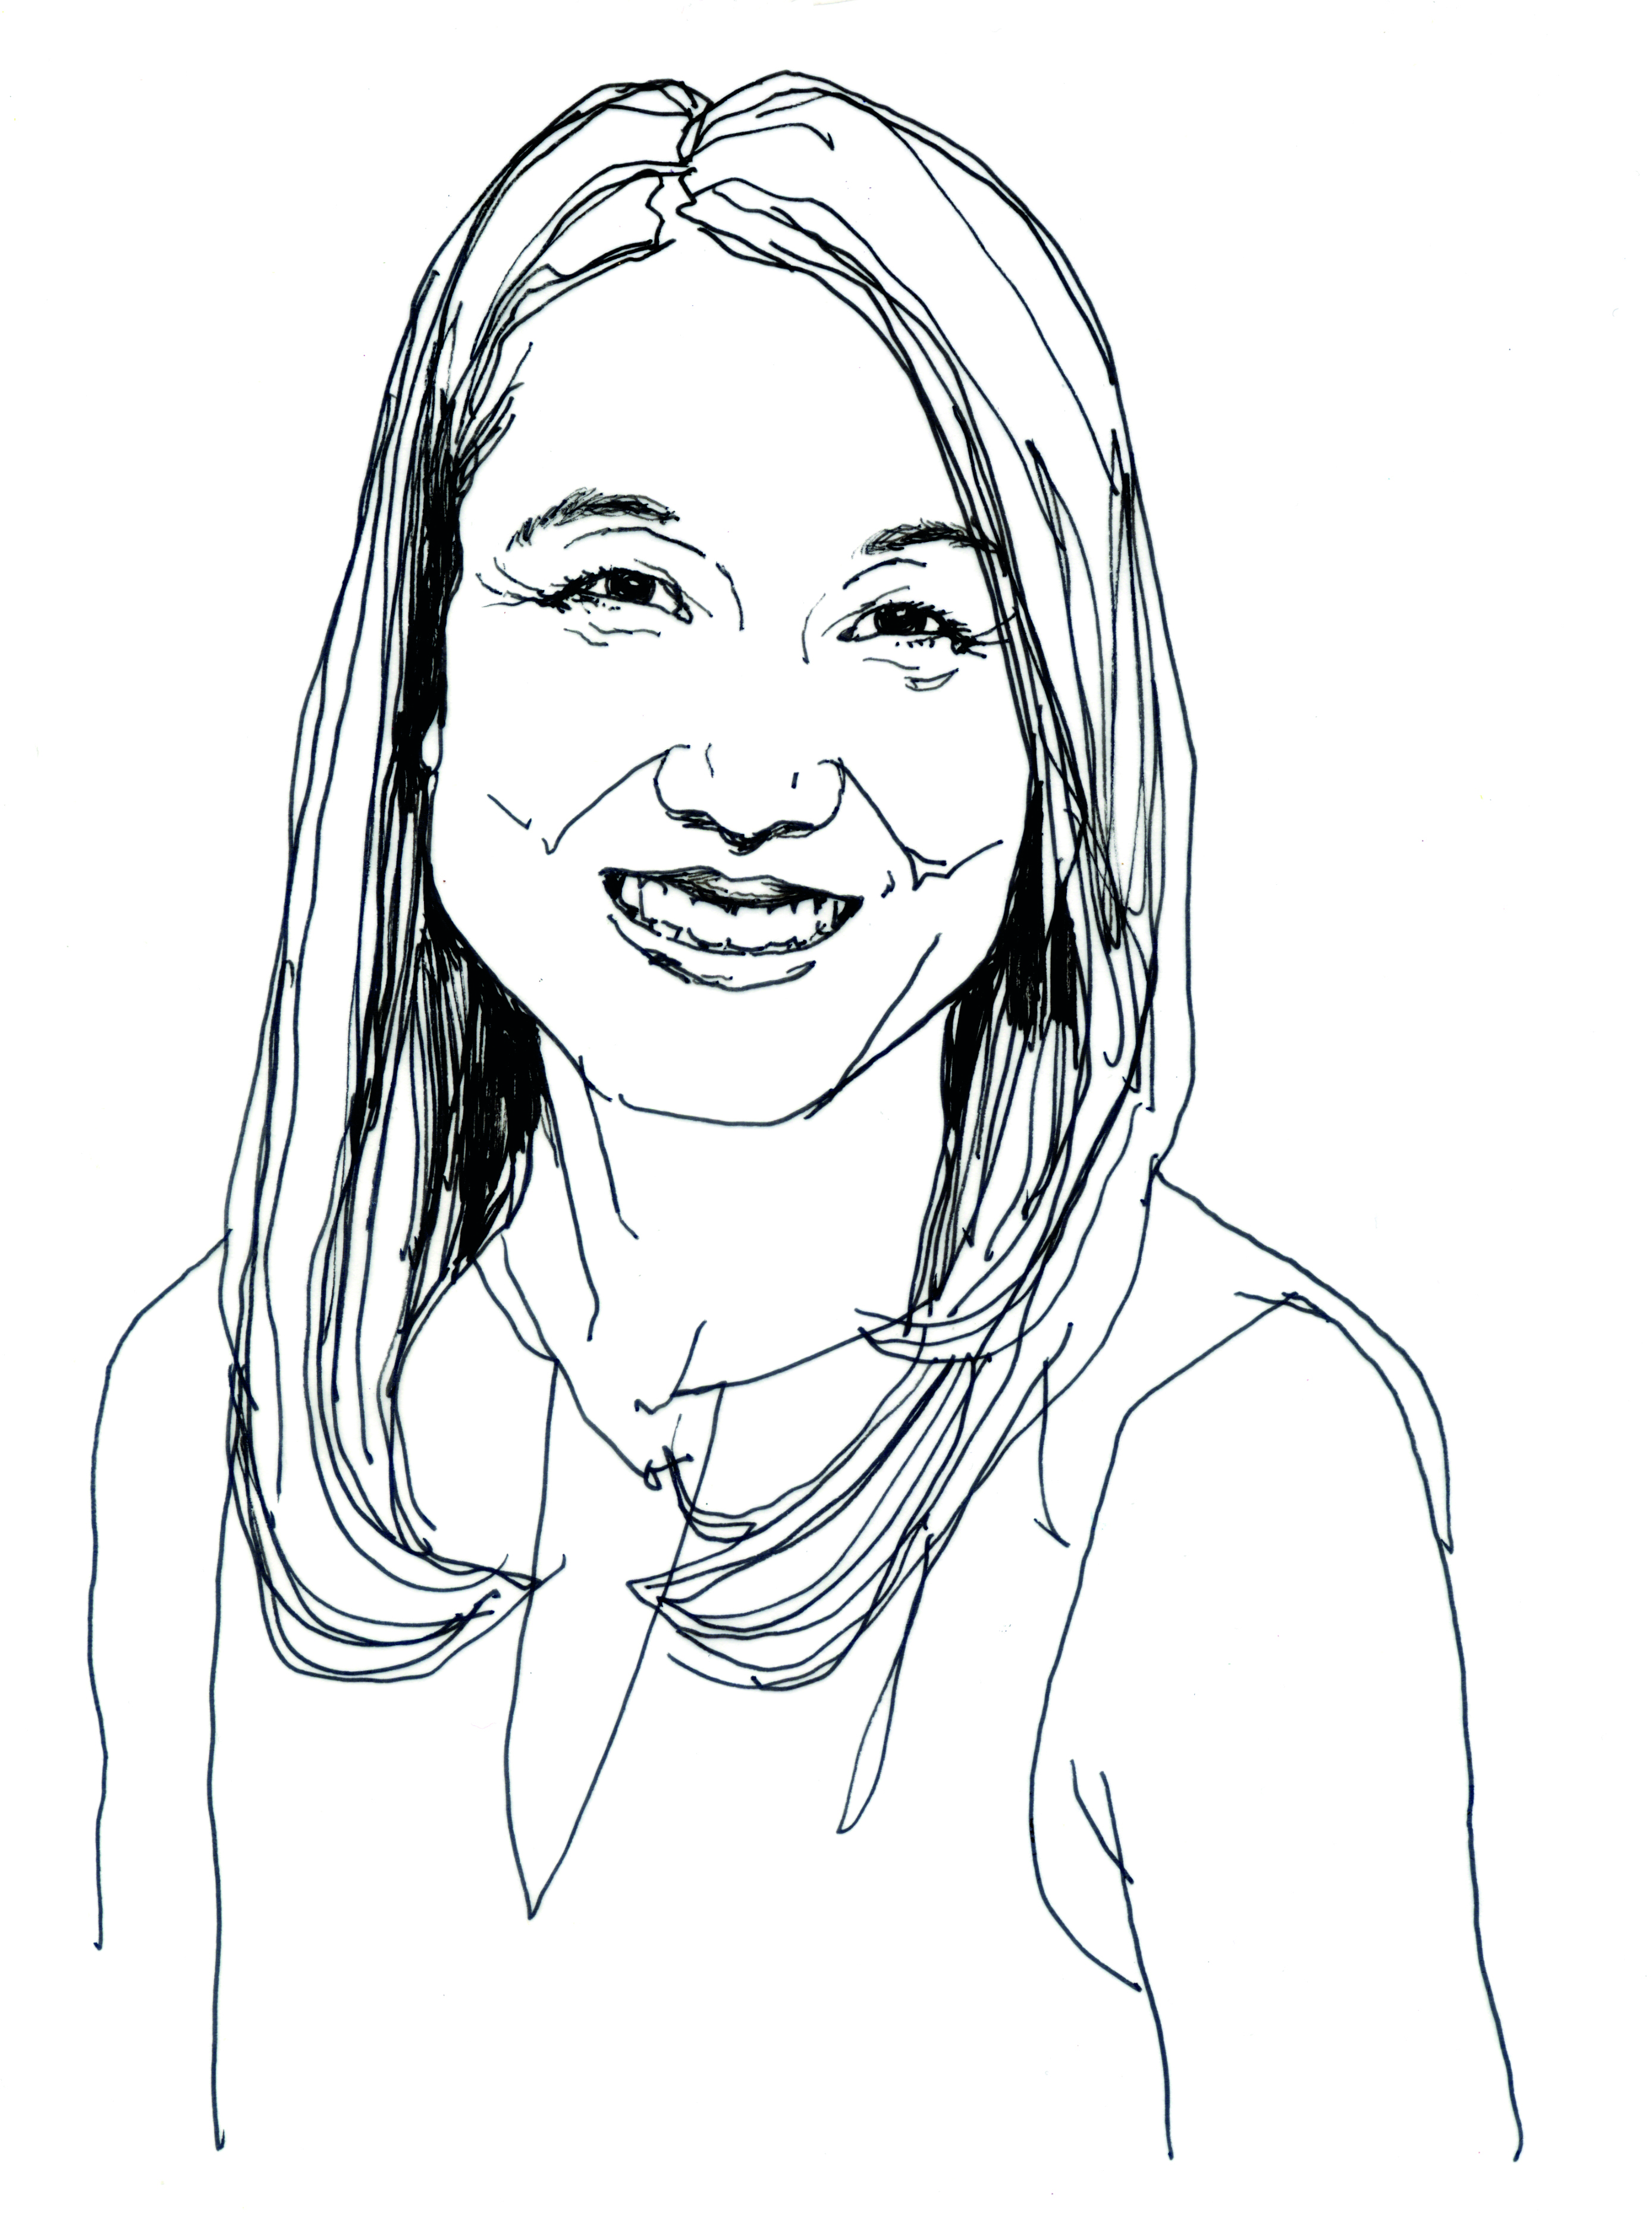 Illustration in black ink of smiling middle-aged East Asian woman.